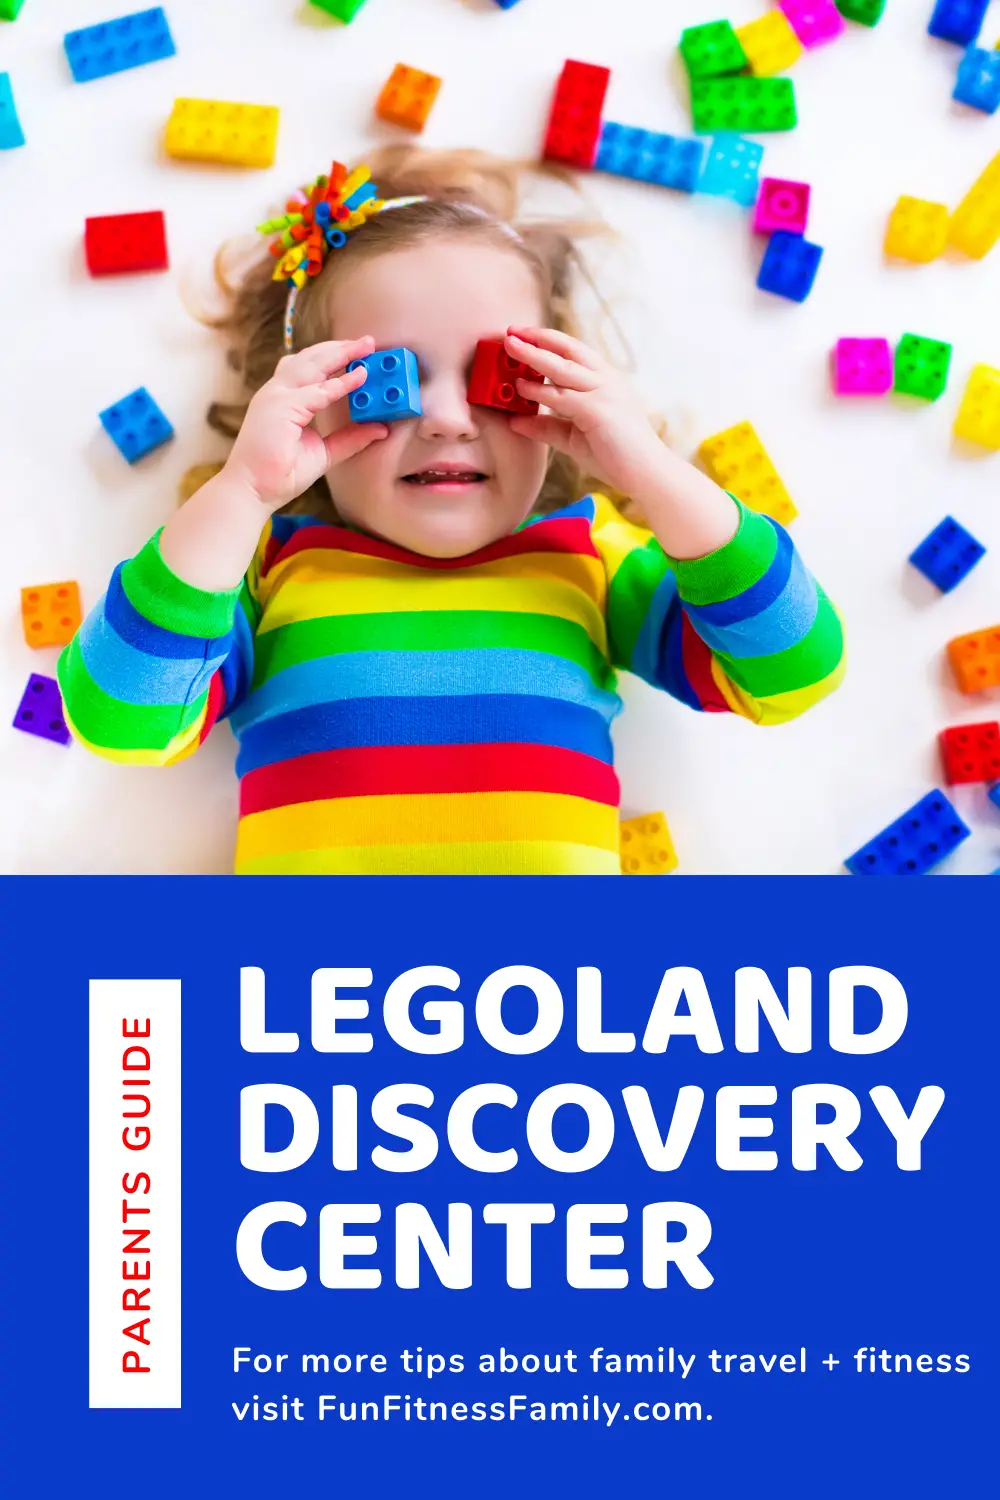 LEGOLAND Discovery Center Dallas/Fort Worth is one of the most fun things to do in Grapevine Texas with kids. This indoor mini theme park includes three rides, a water play area, a 4-D theatre, and plenty of hands-on LEGO fun! #Dallas #Texas #TravelwithKids #FamilyTravel